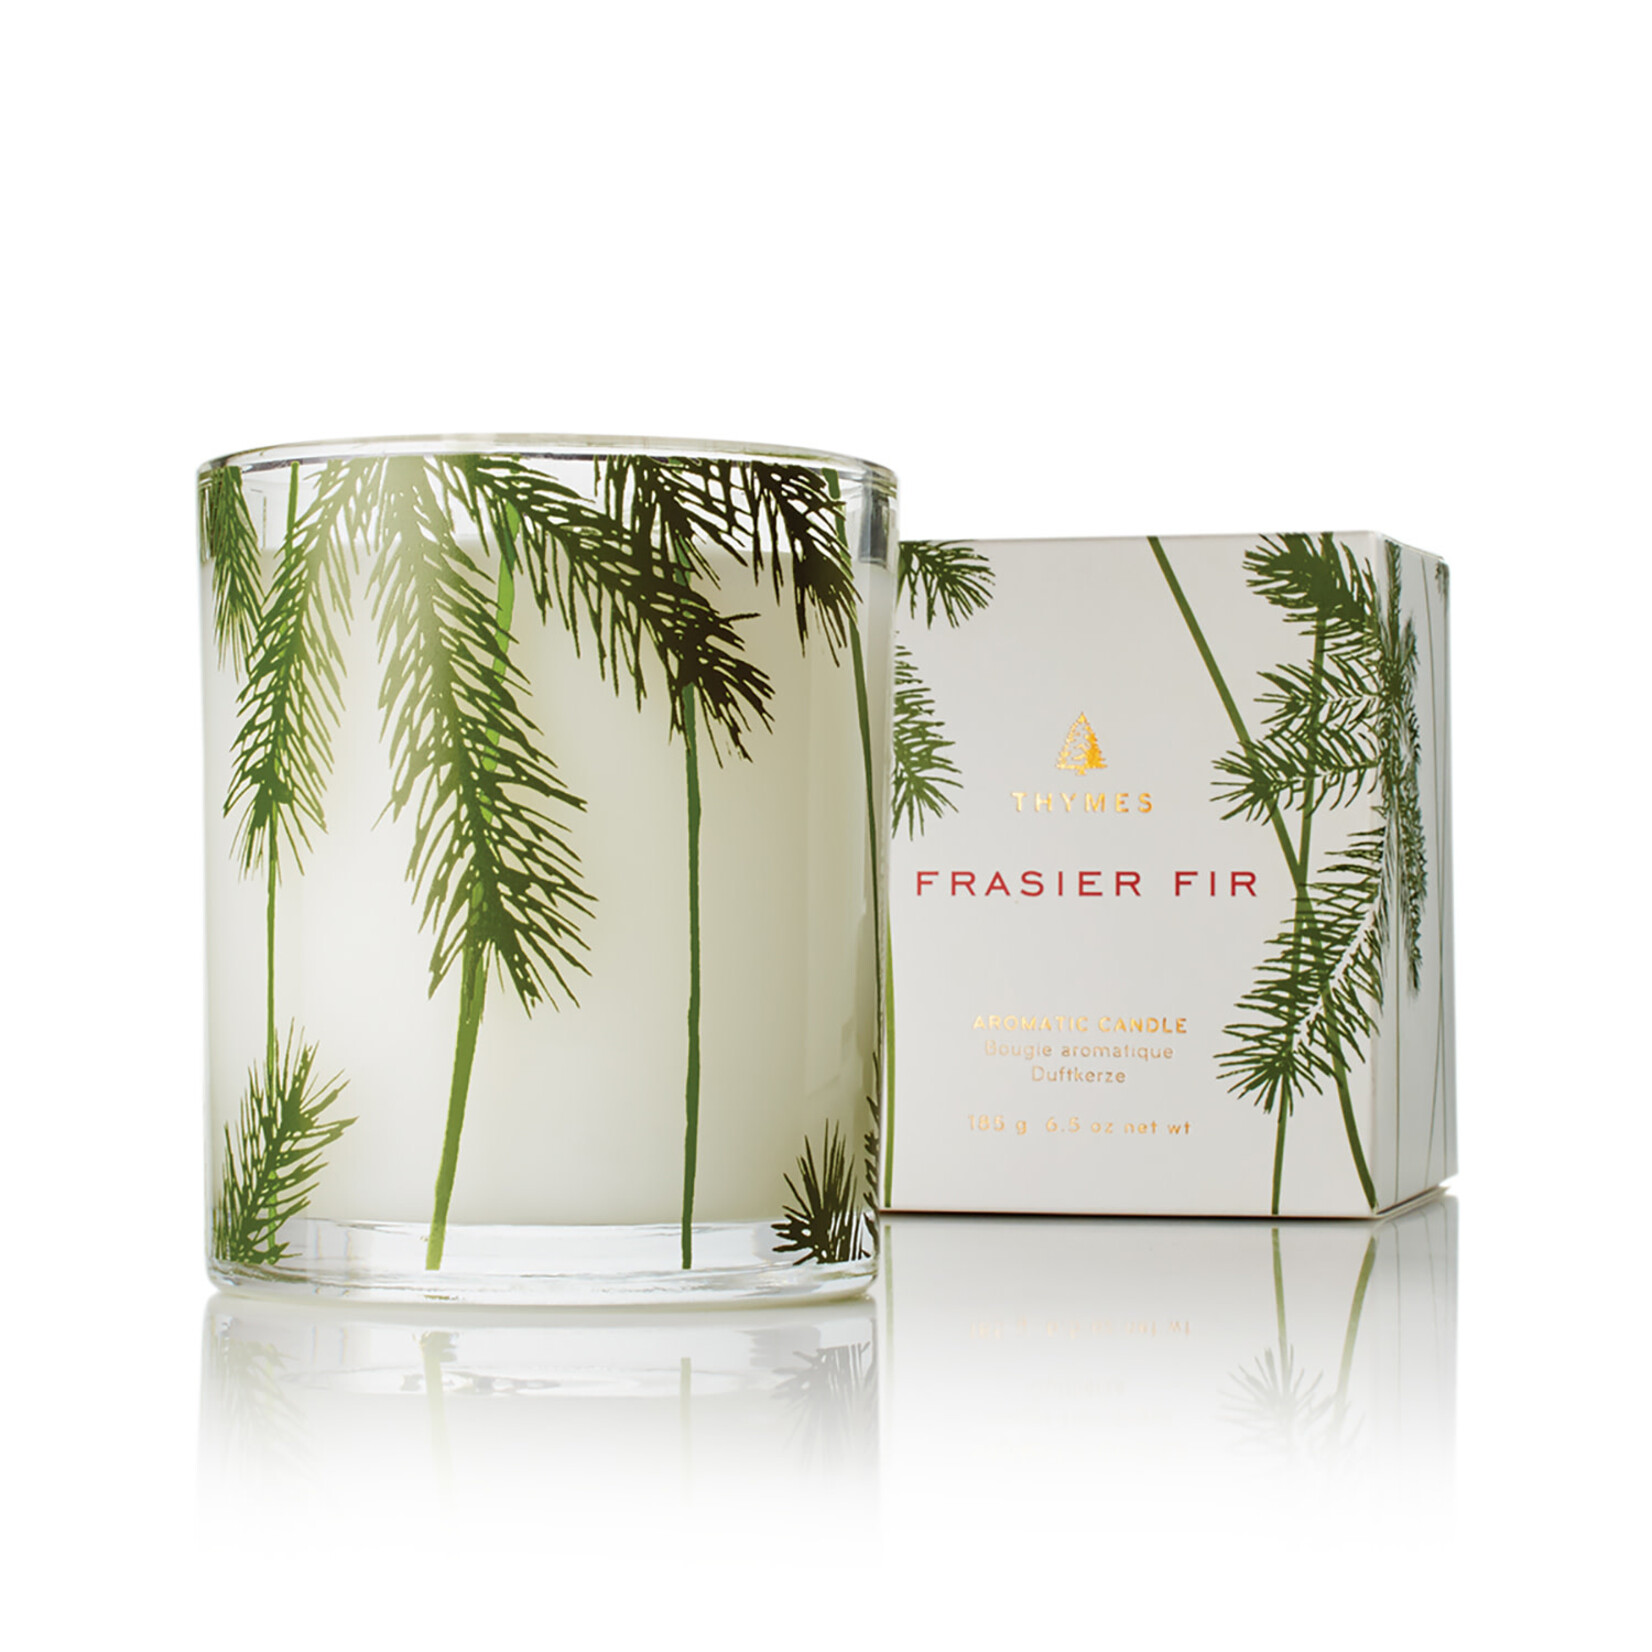 Frasier Fir Pine Needle Design Poured Candle